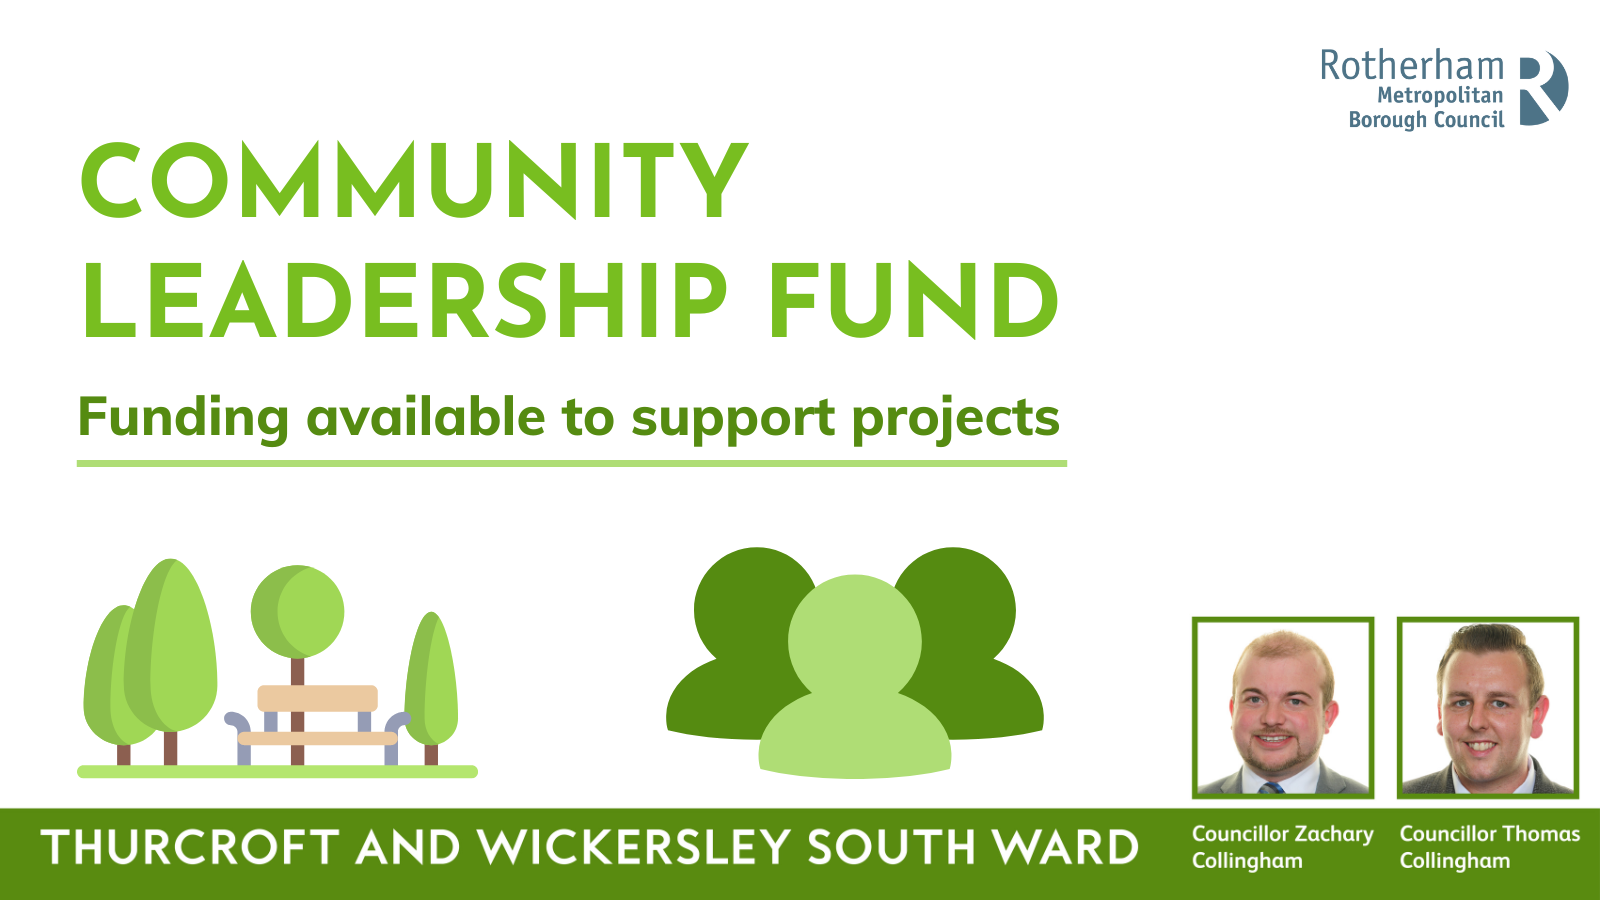 Thurcroft and wickersley south community leadership fund